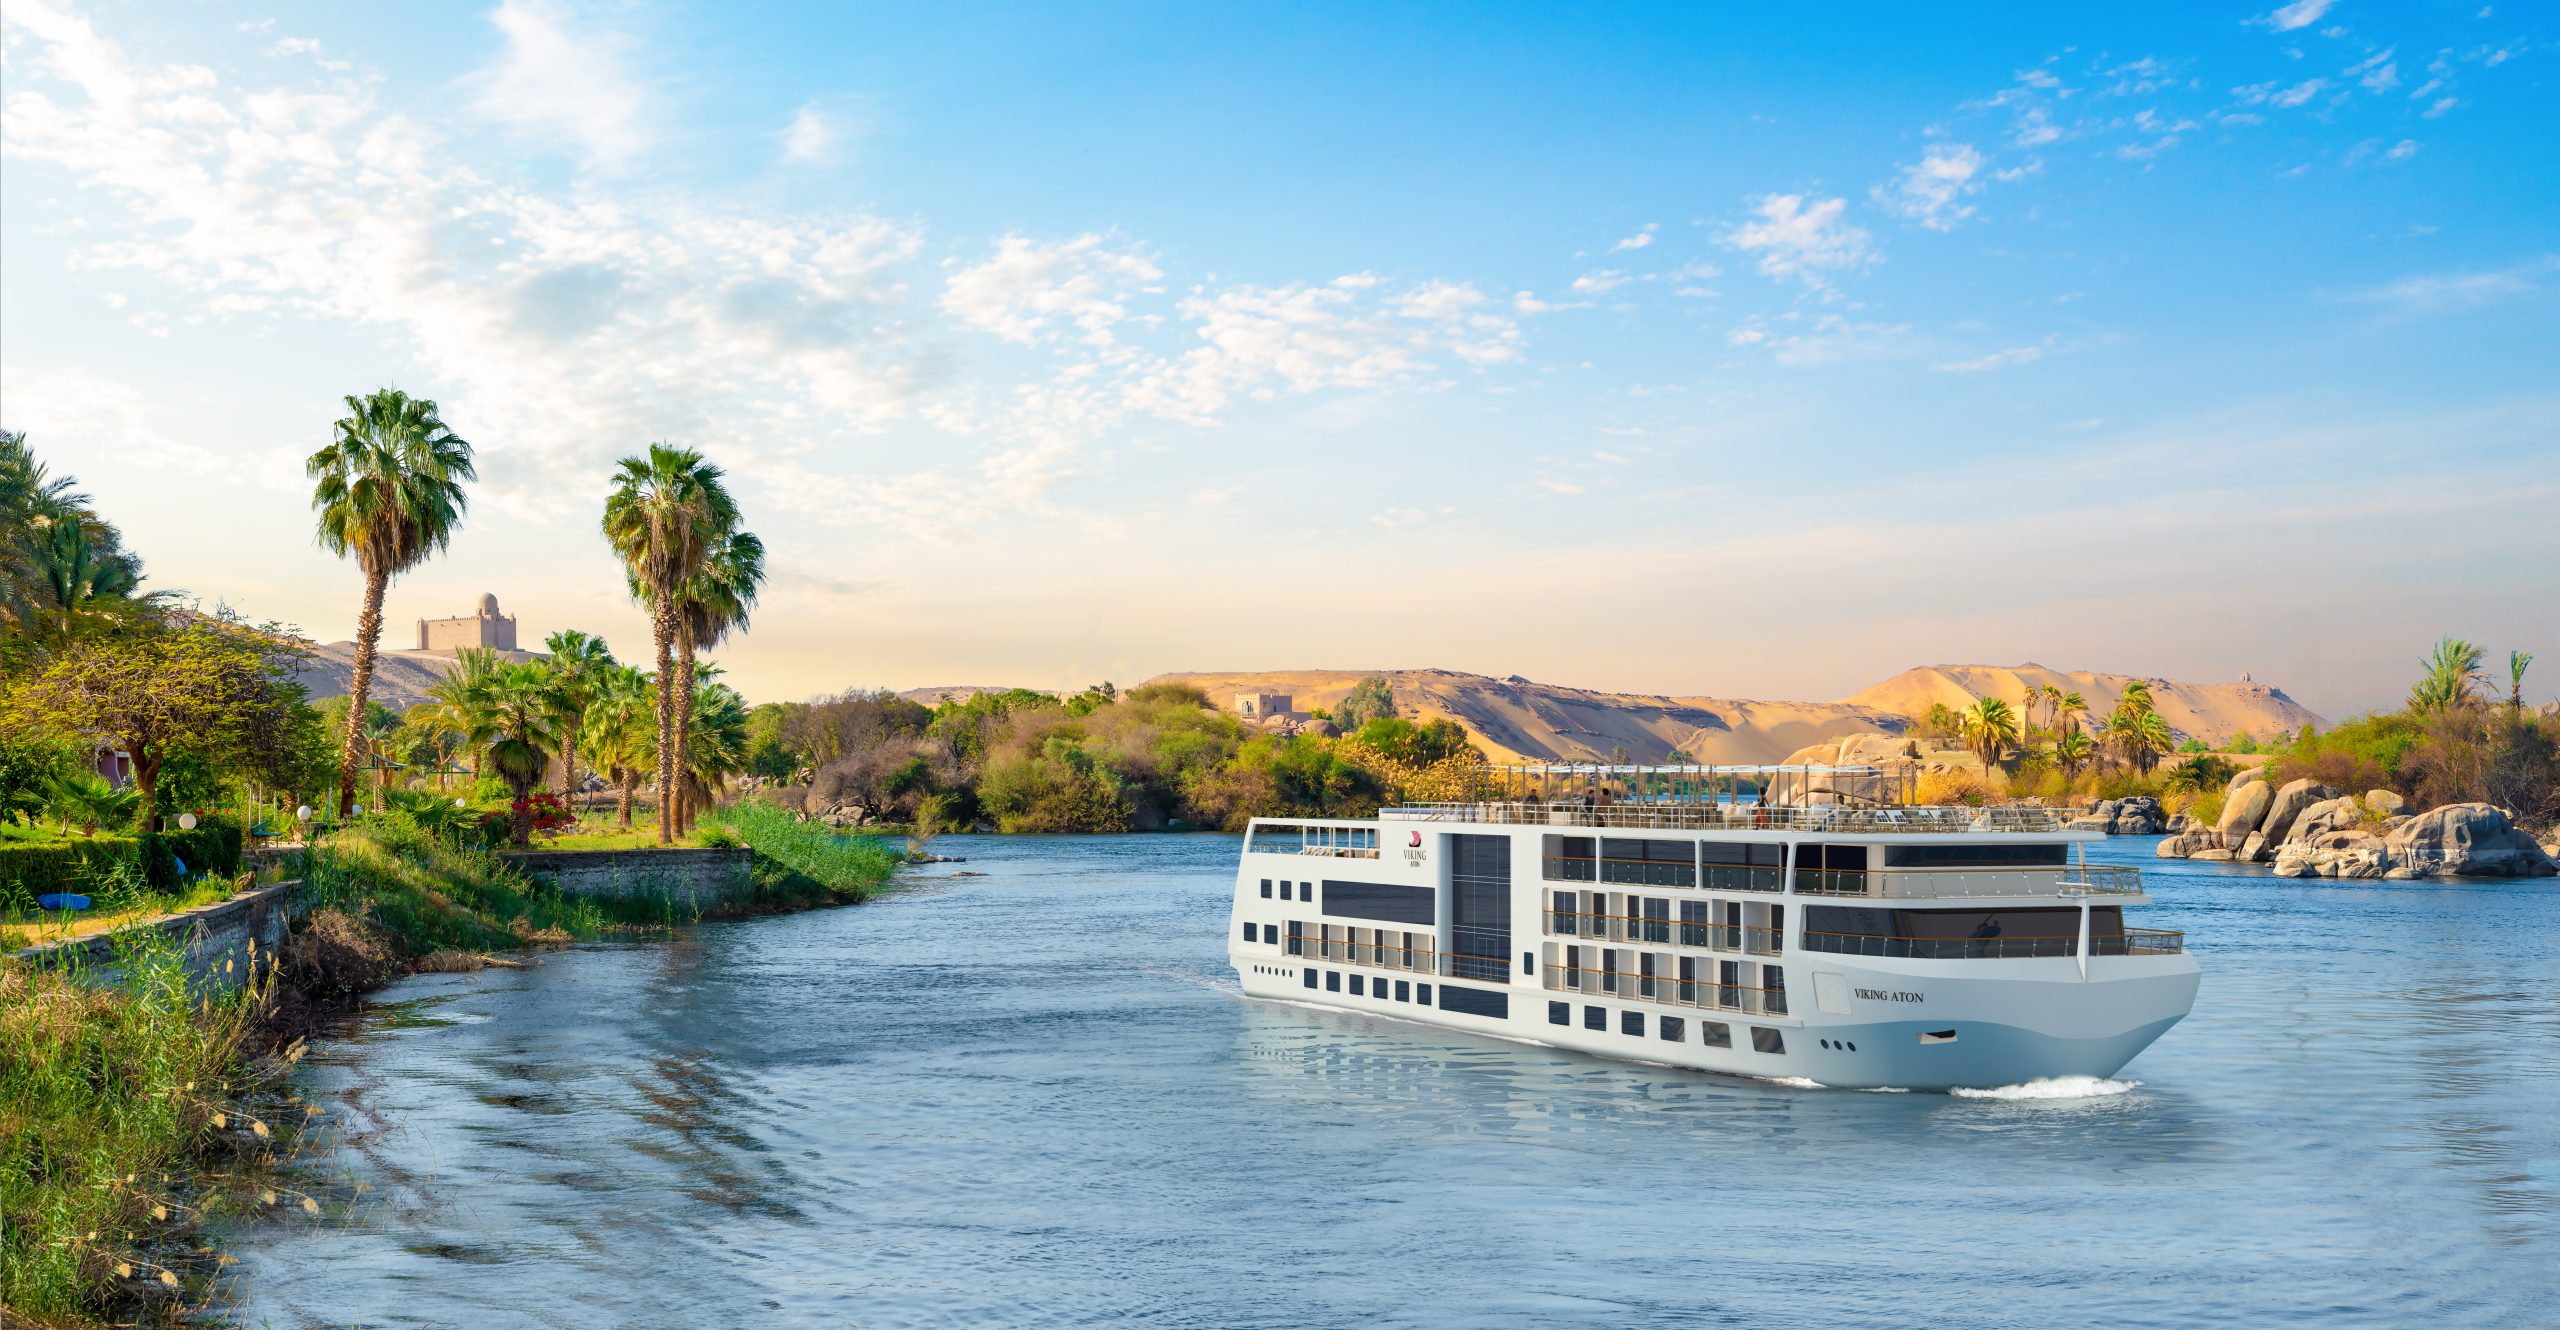 New ship, Viking Aton will debut on the Nile River in 2022